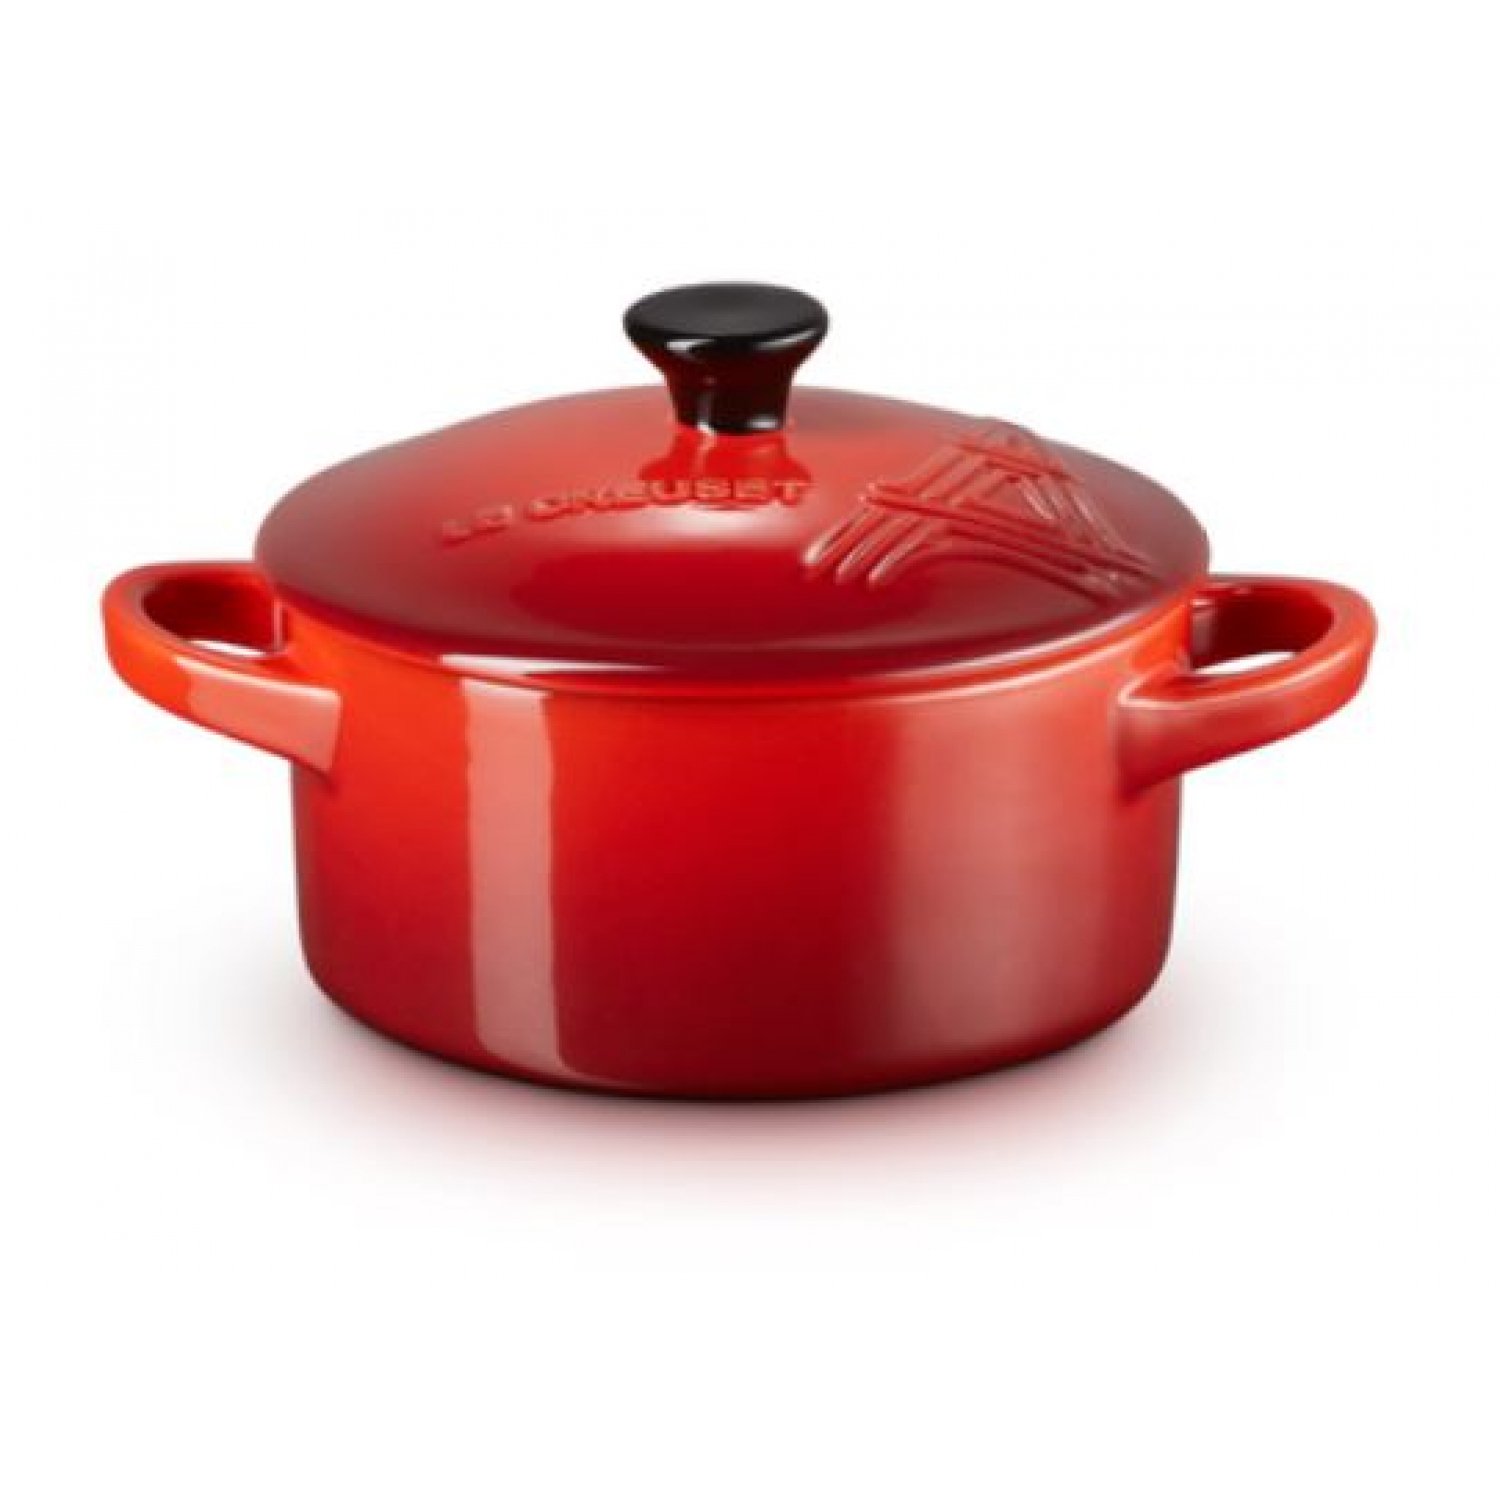 Le Creuset Cocotte Eiffel Tower Cherry Red